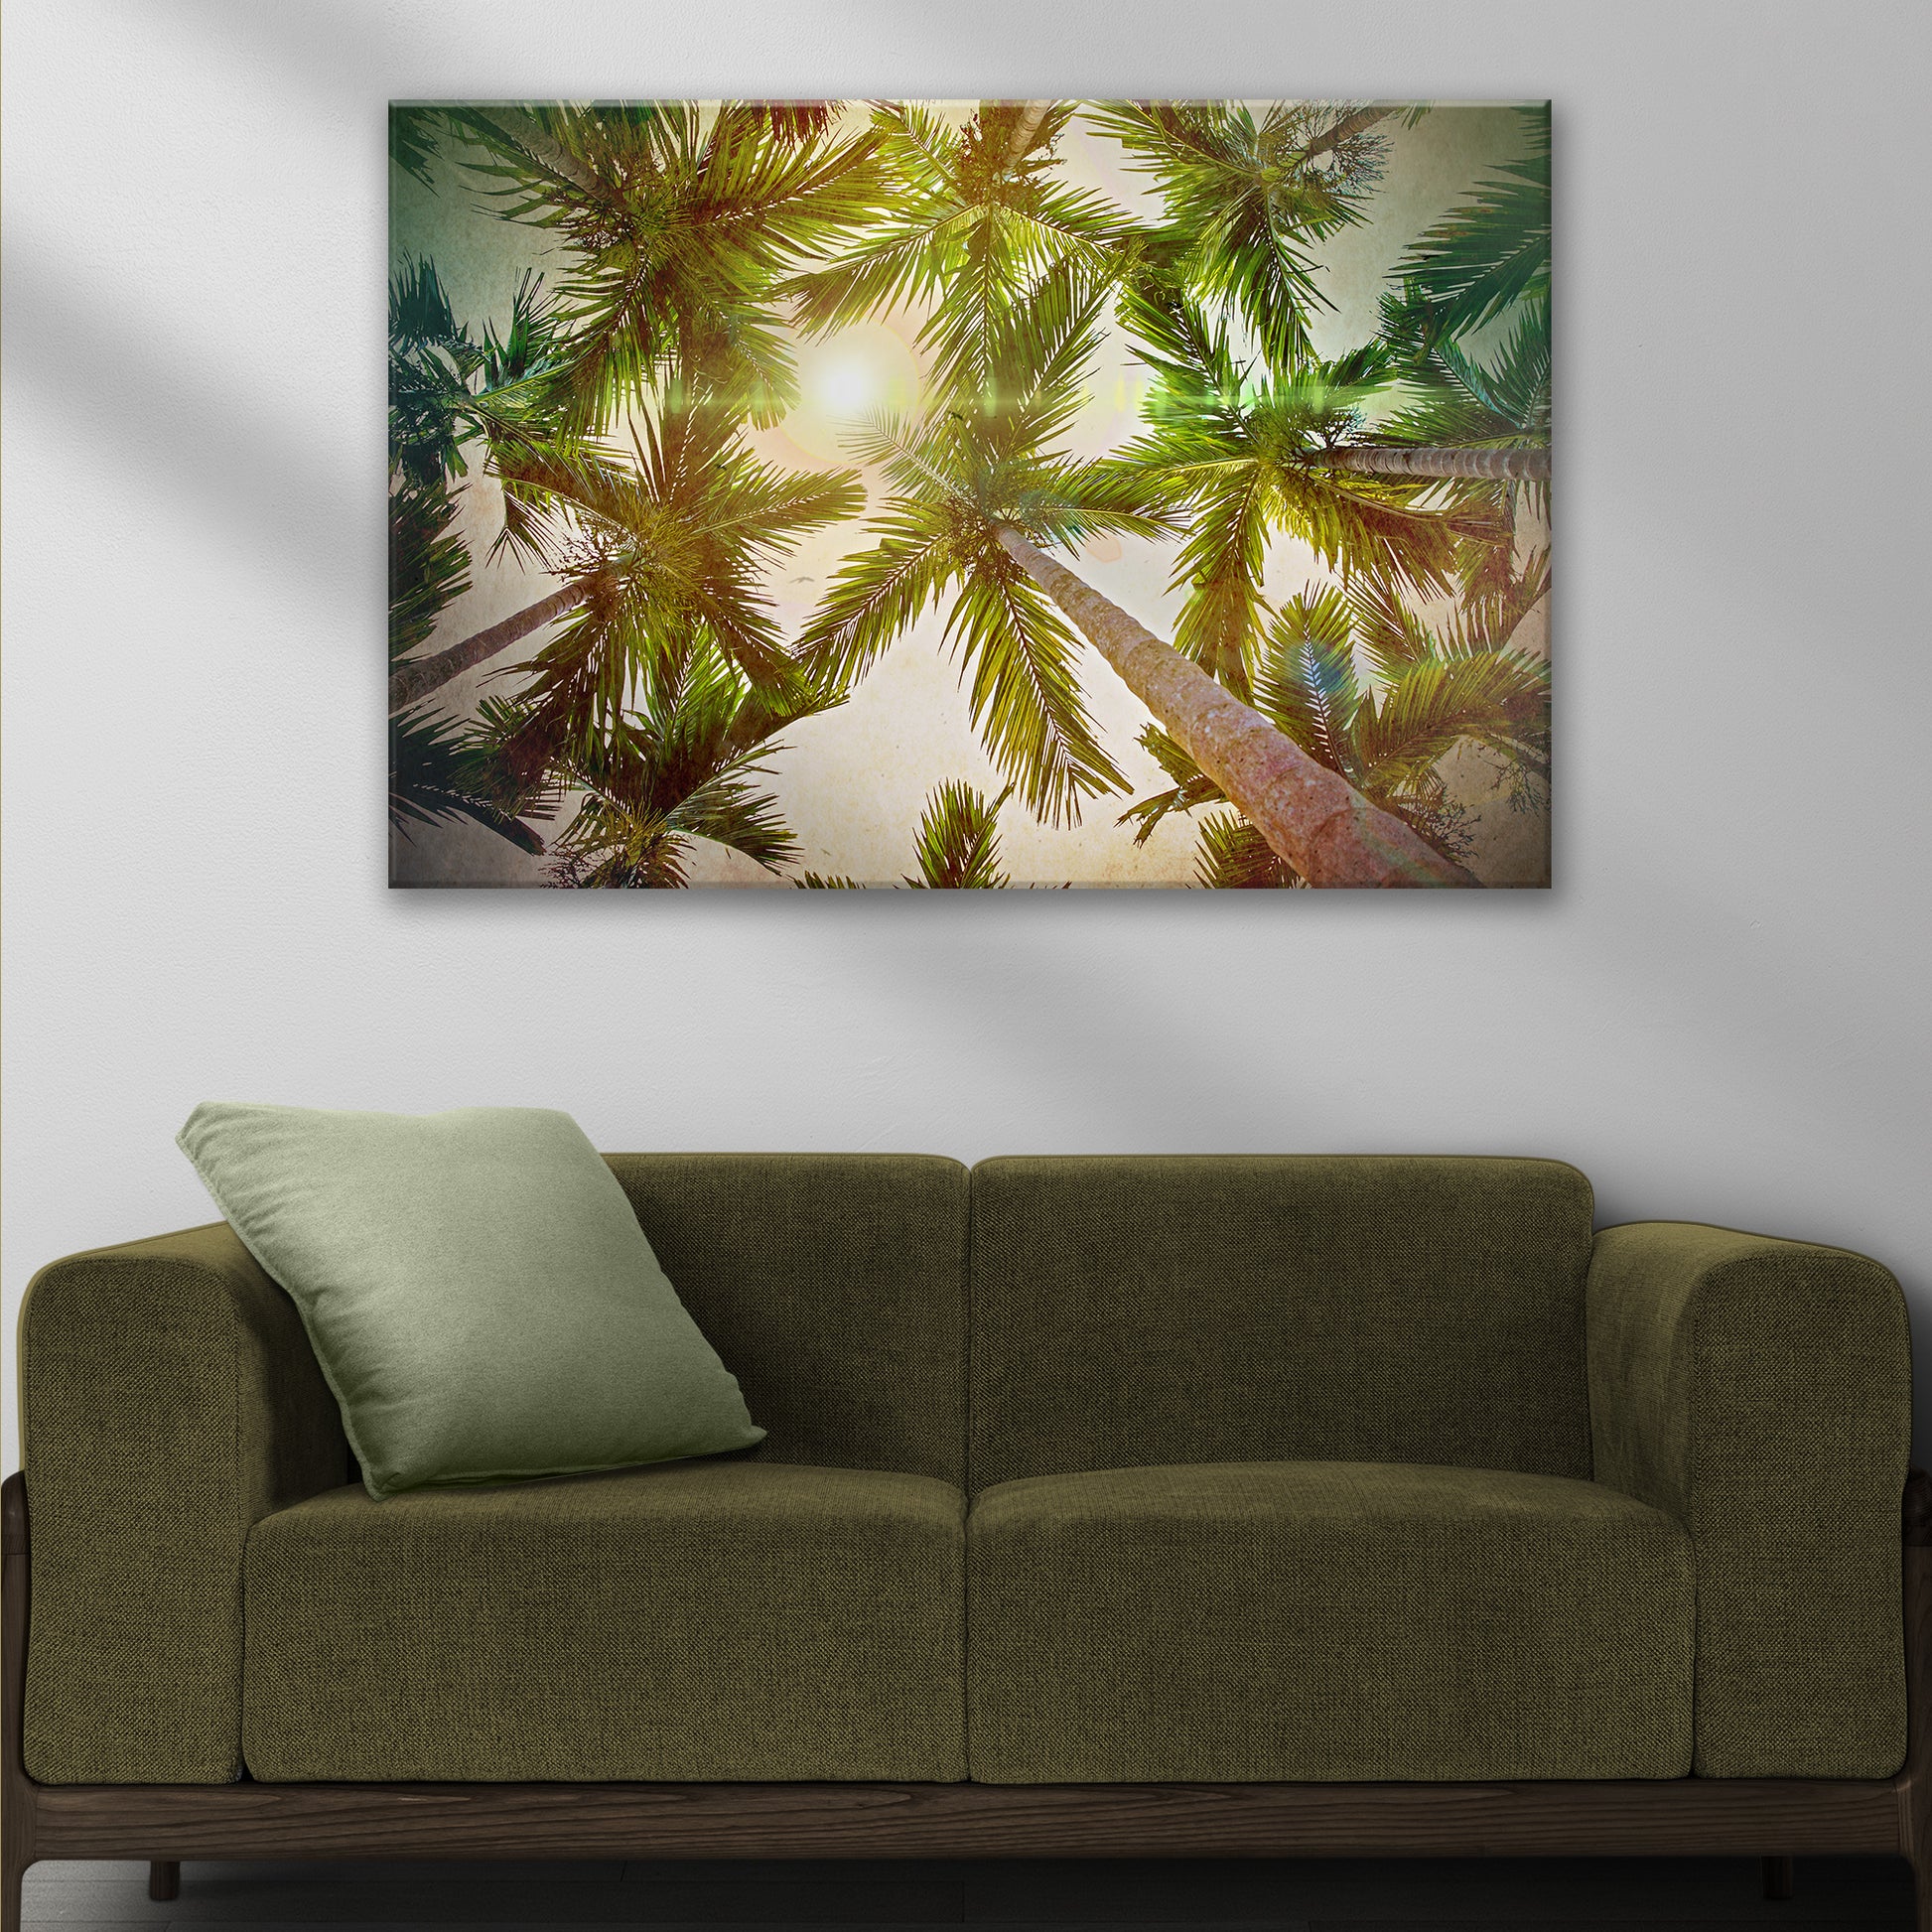 Looking Up Palm Trees Canvas Wall Art - Image by Tailored Canvases